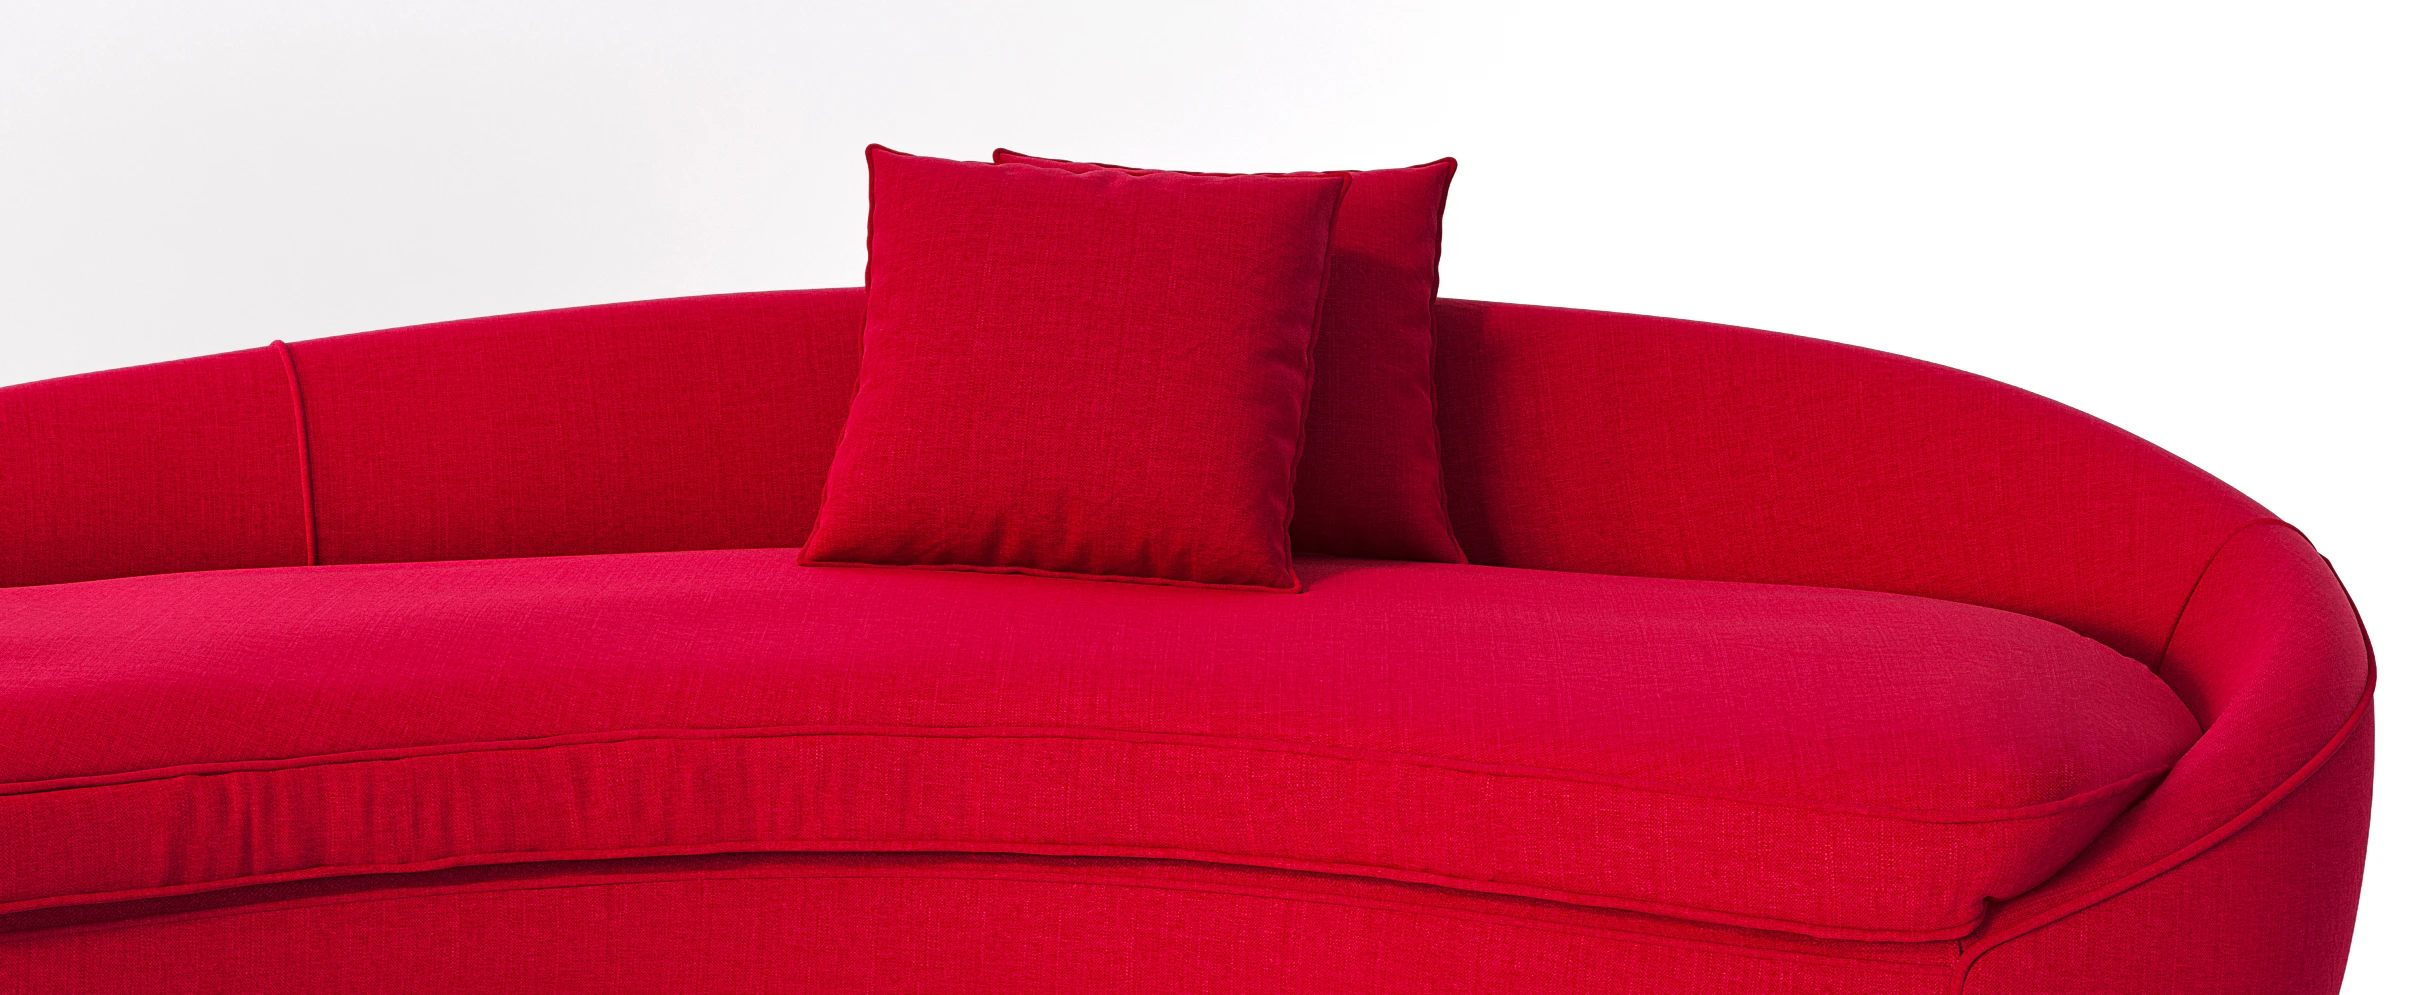 A red color sofa 3d rendering model with two red pillows